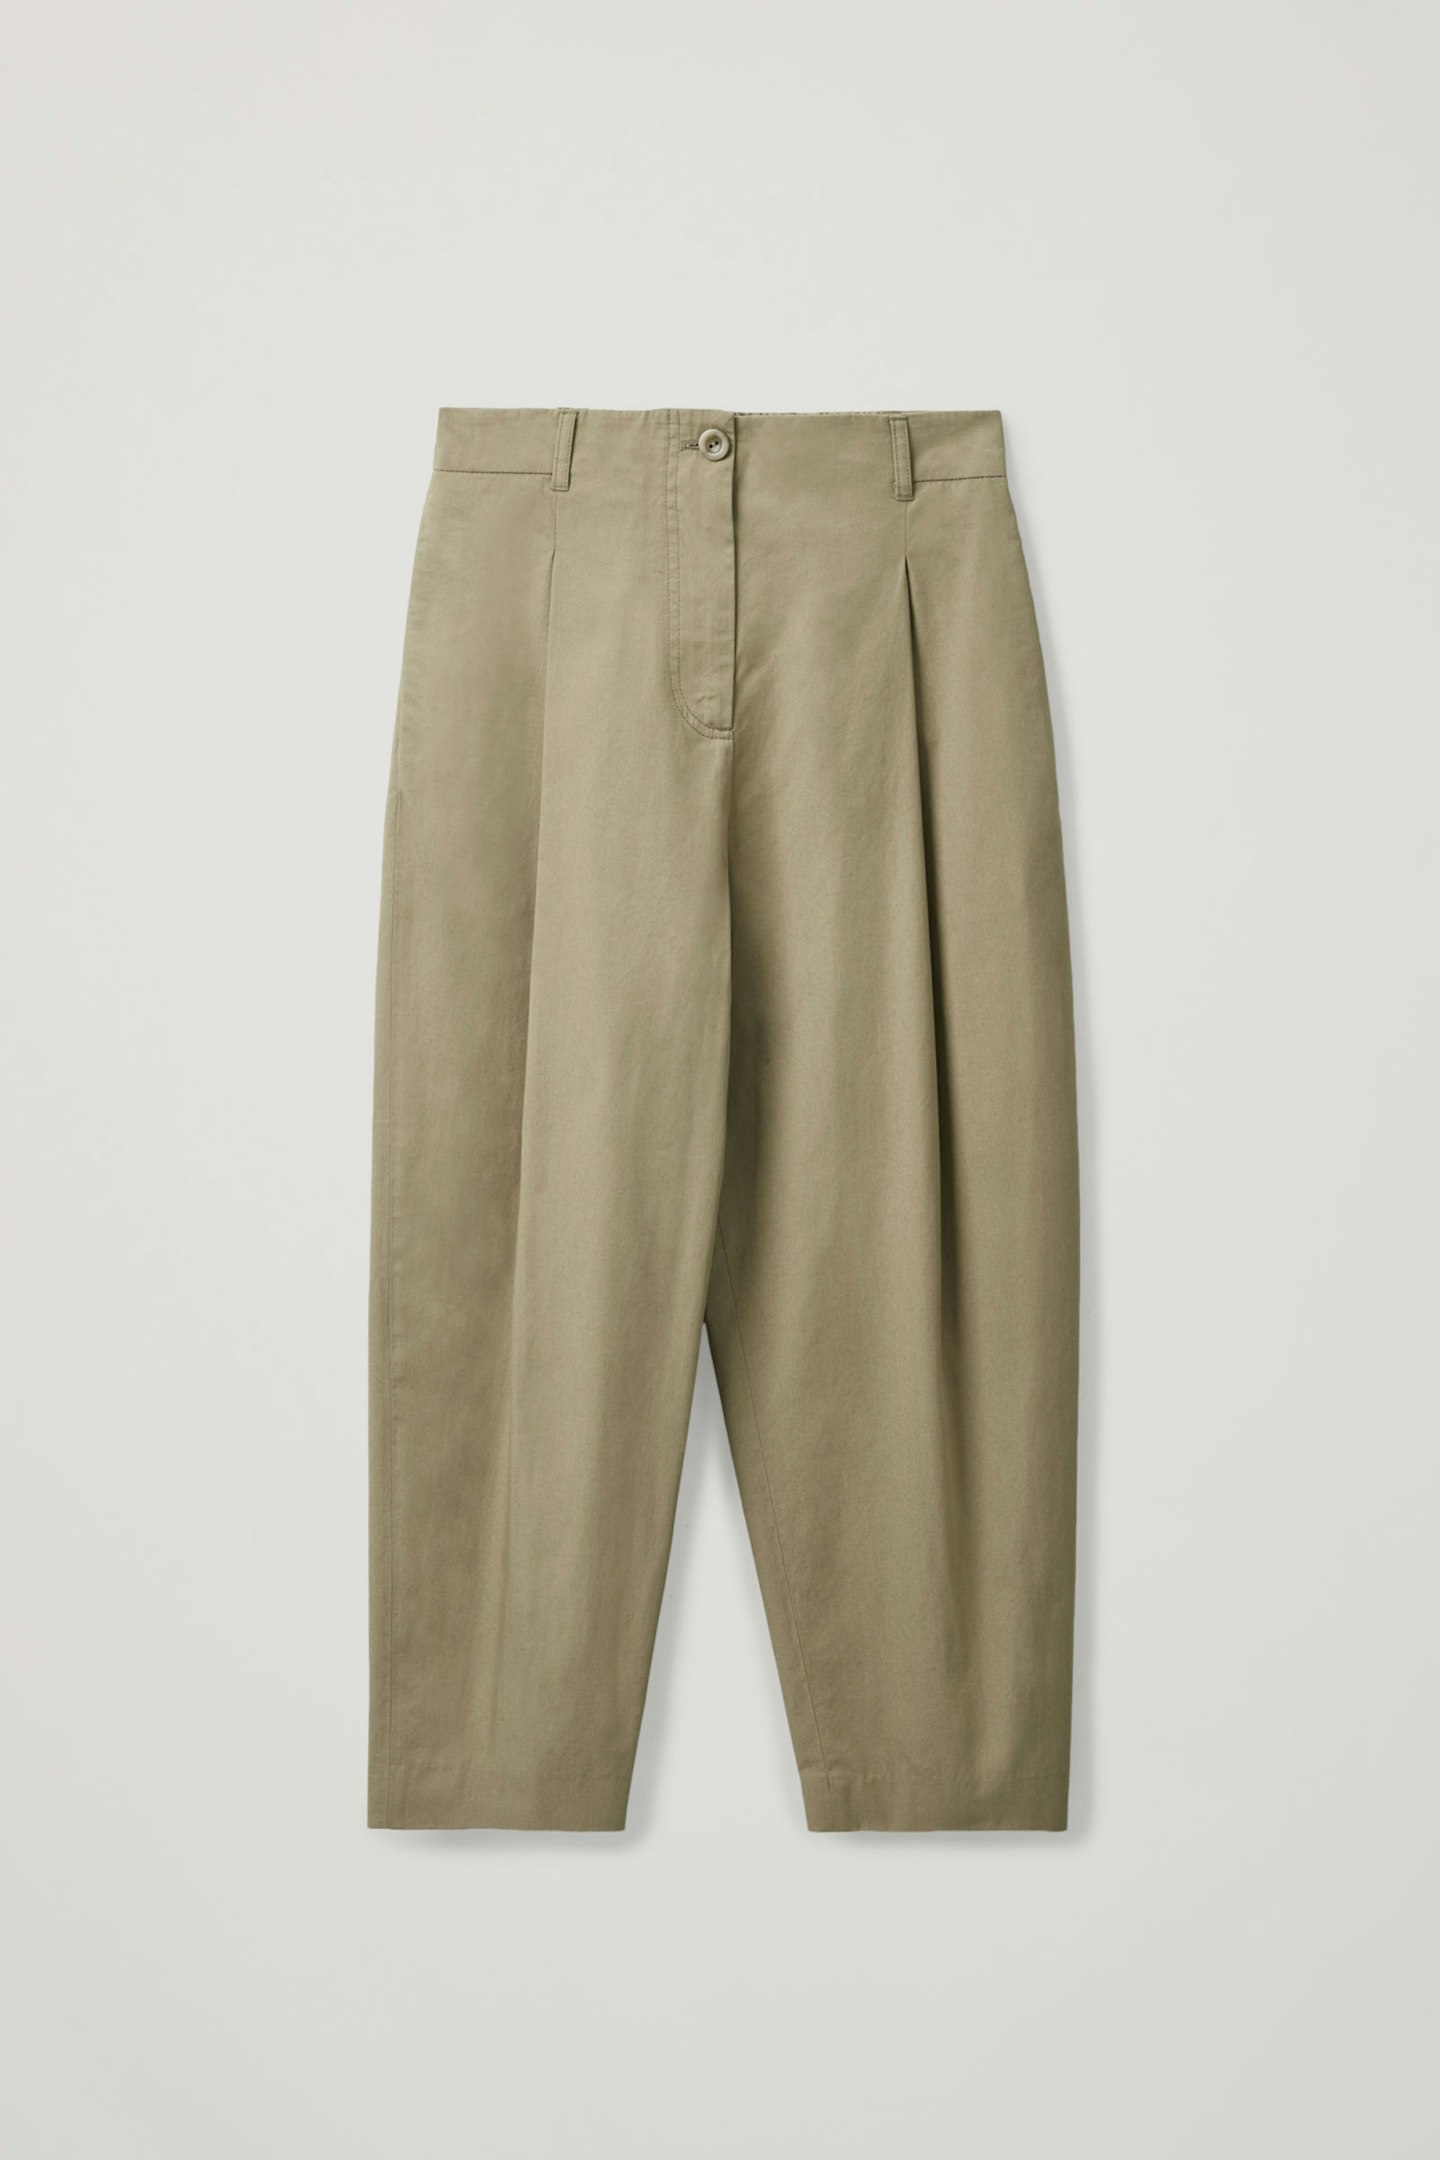 COS, Rounded Cotton Trousers, £69